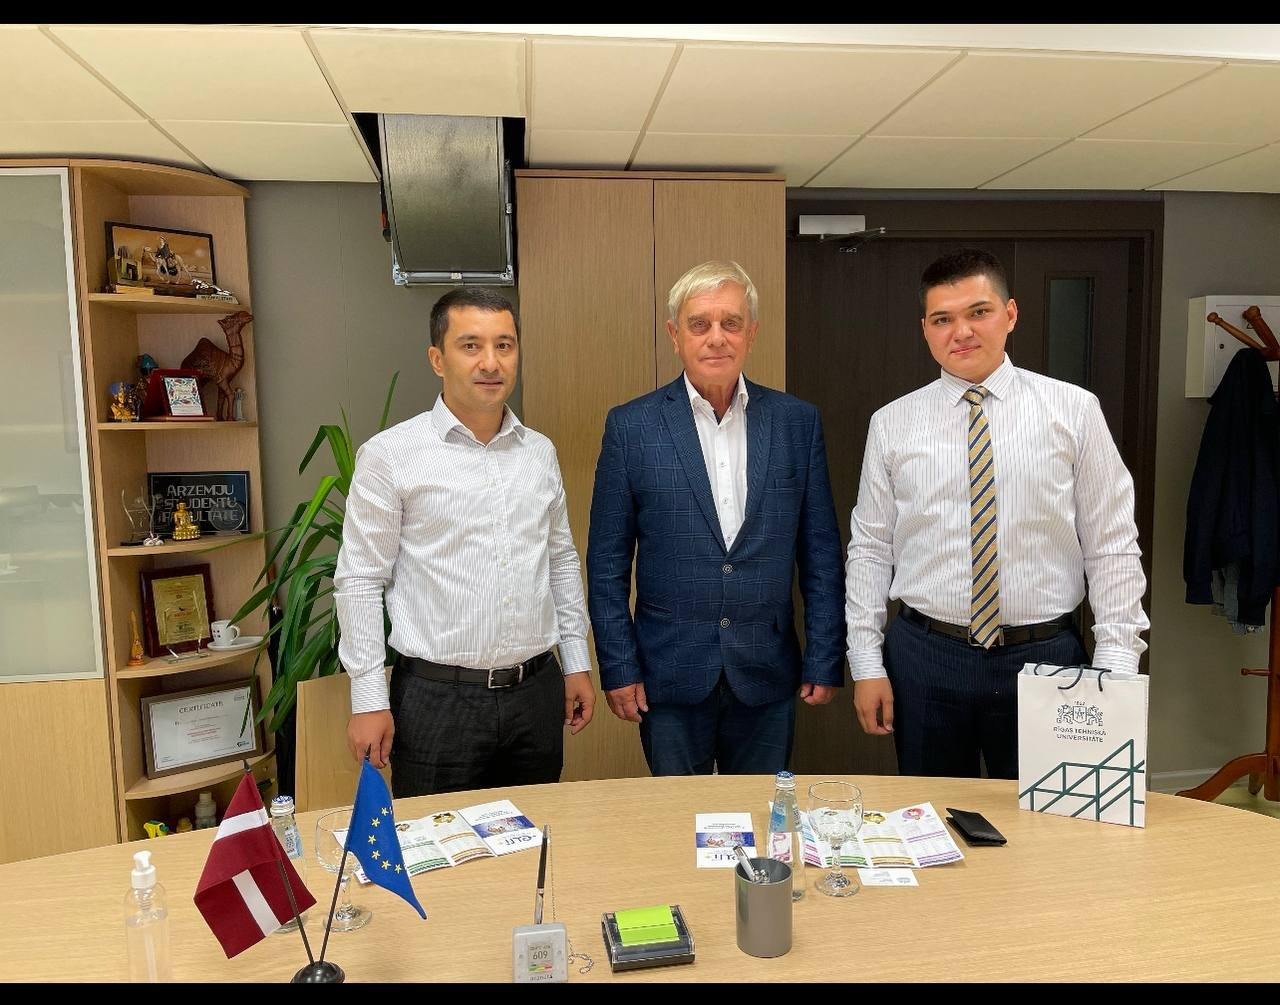 Currently, Farrukh Suleymanov, Head of Human Resources Department, and Abduvahob Vosikov, Deputy Head of Business Management faculty of the Yeoju Technical Institute in Tashkent, are on a working visit abroad